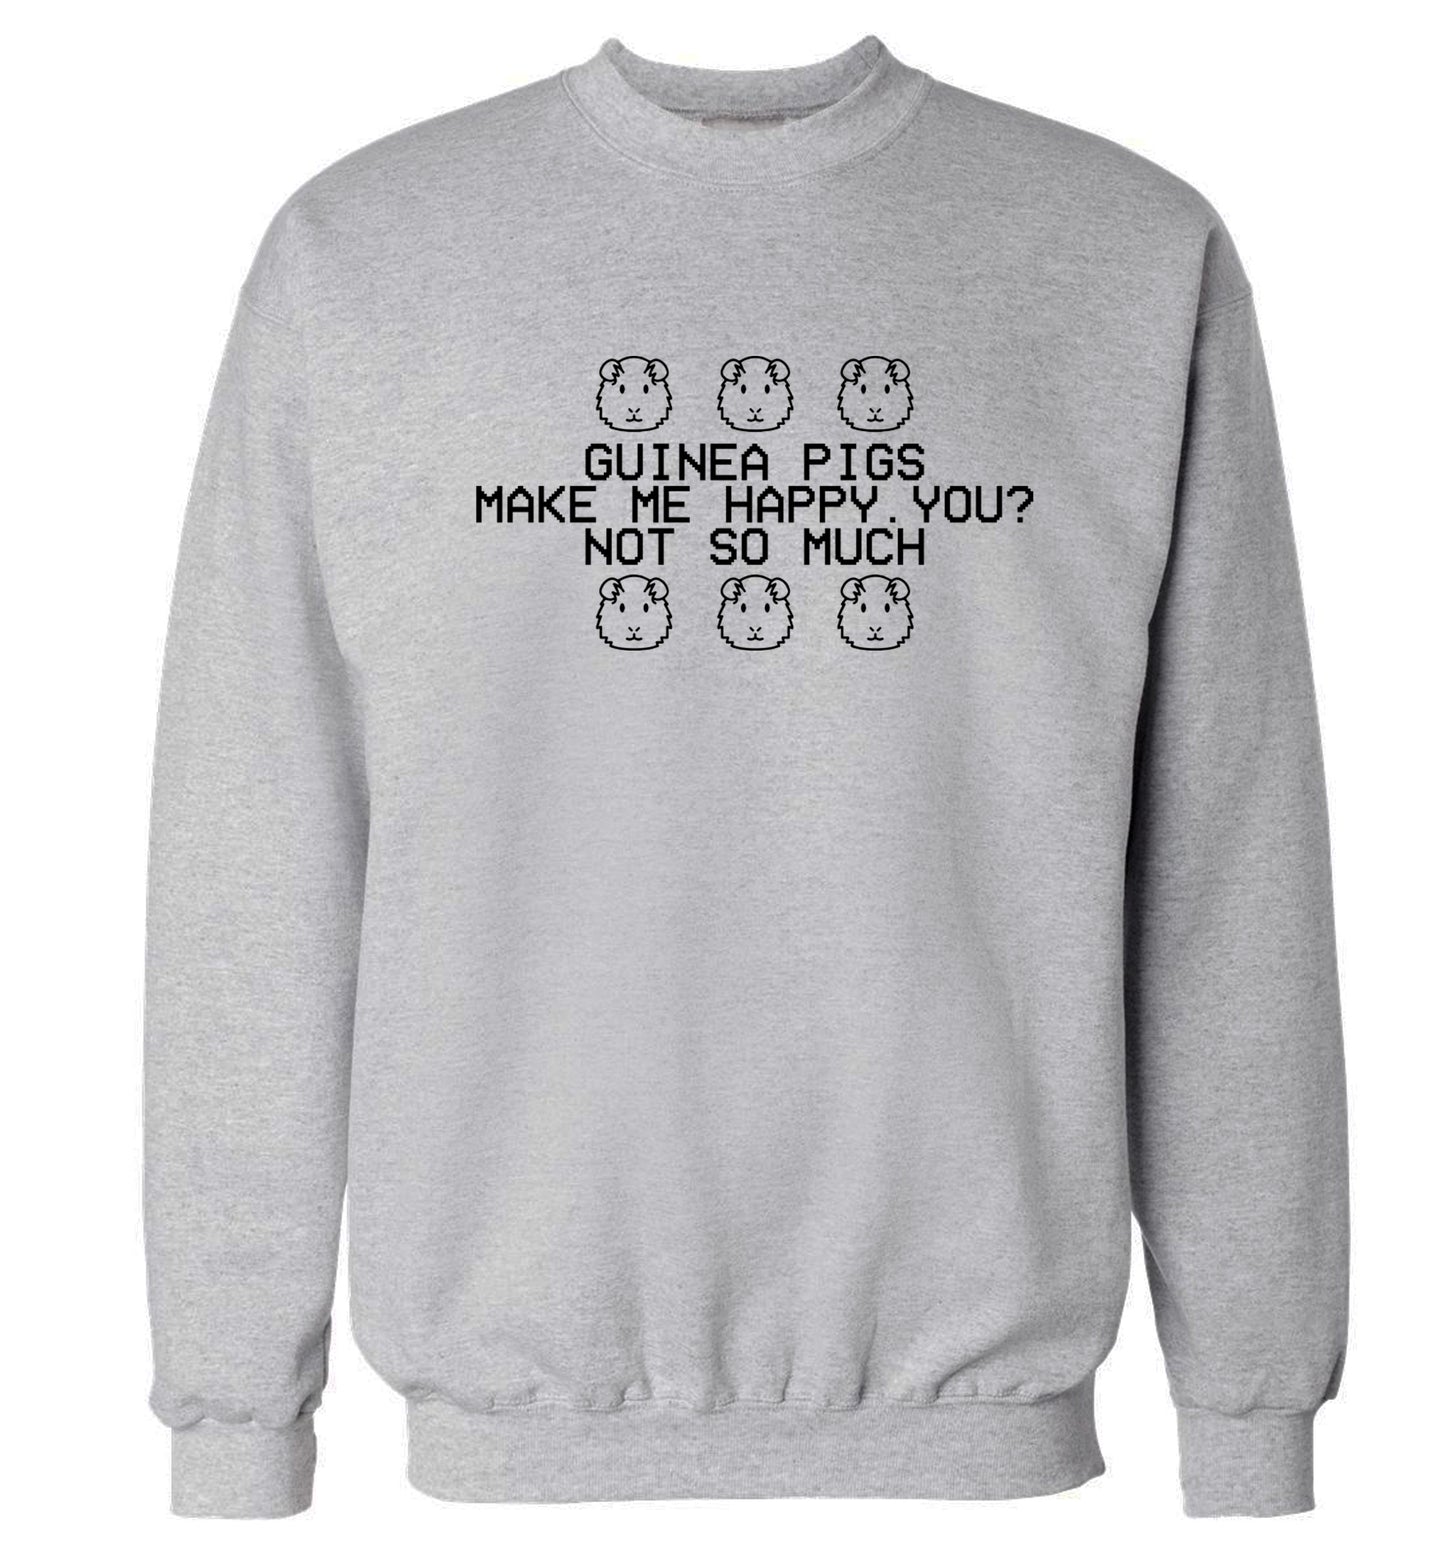 Guinea pigs make me happy, you not so much Adult's unisex grey  sweater 2XL